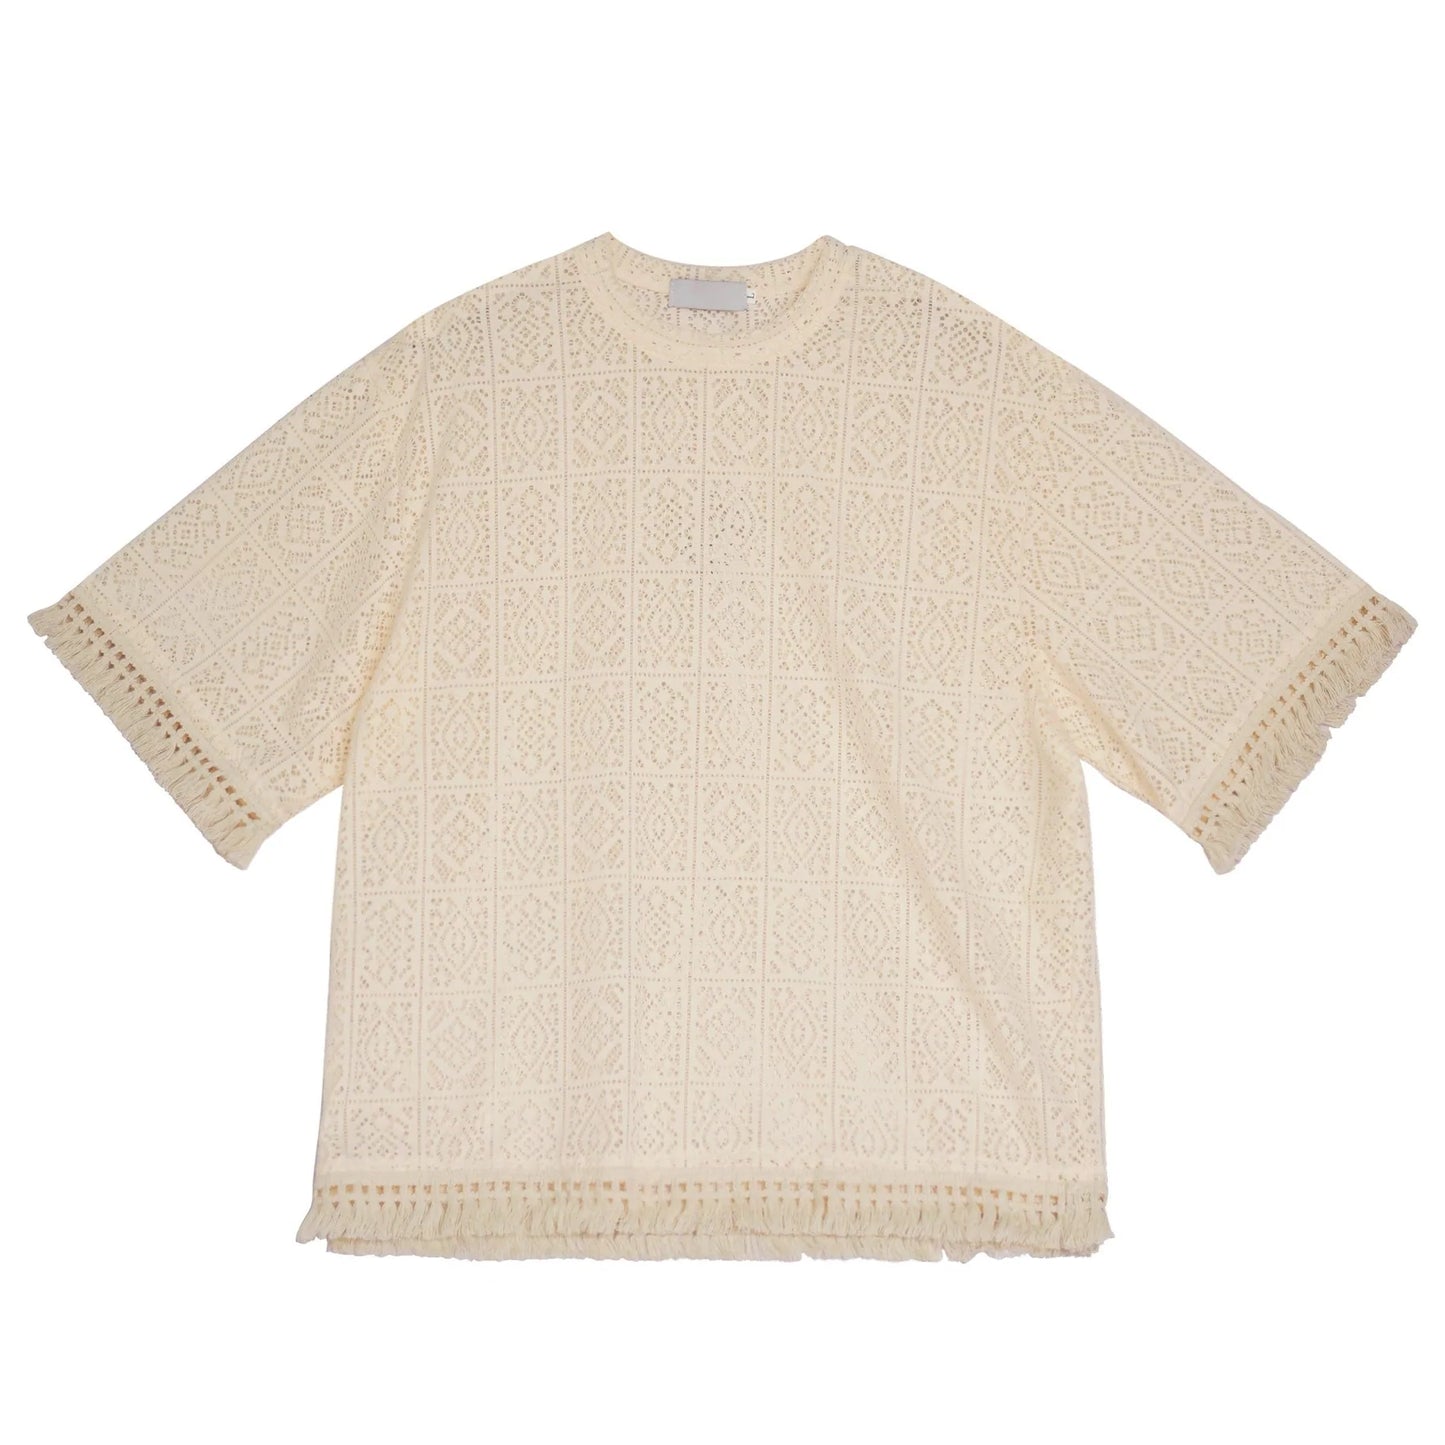 Apricot Hollow Lace Round Neck T-shirt